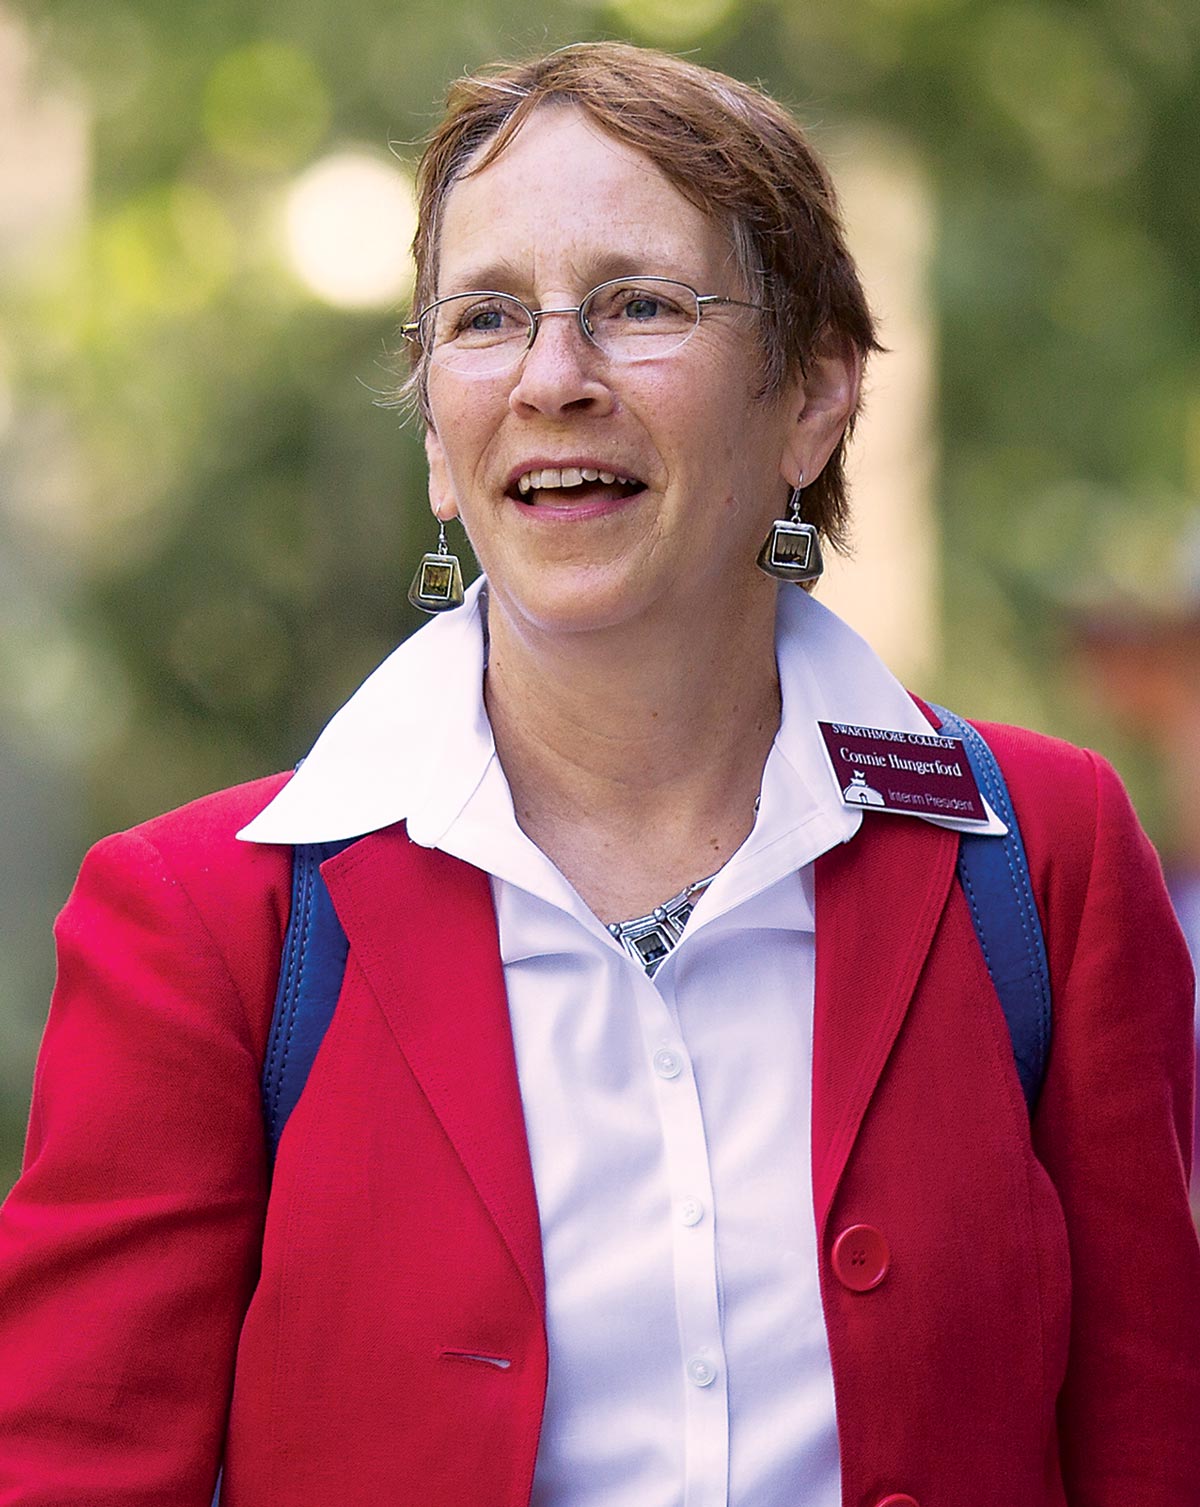 Connie Hungerford, smiling and wearing a red blazer and white collared shirt